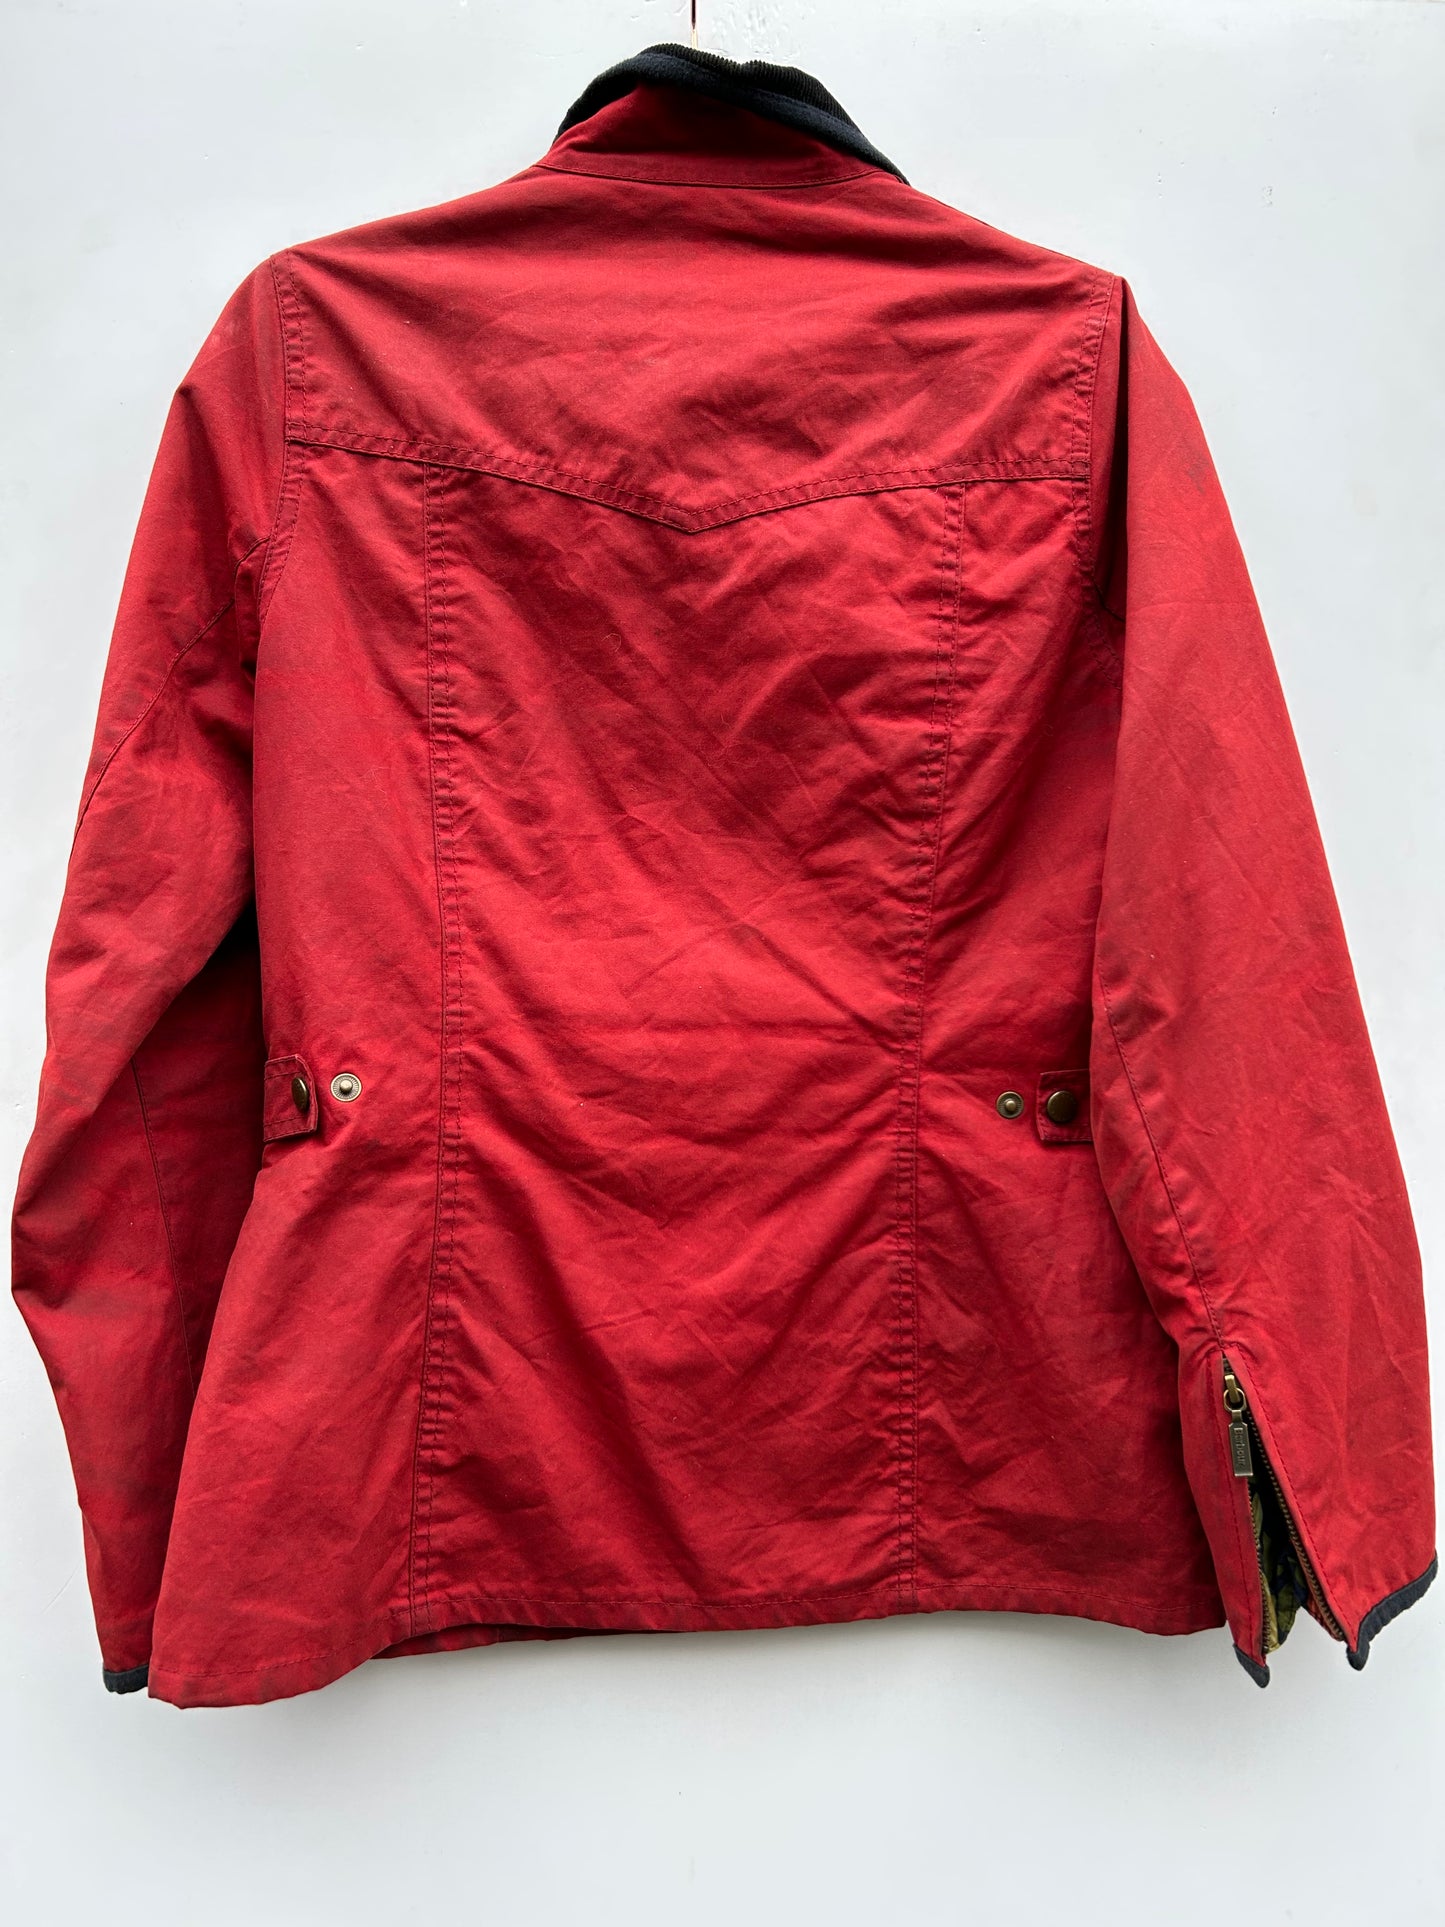 Barbour Giacca corta rossa donna Tg. 40 Morris Red Wax Utility Jacket Size UK10